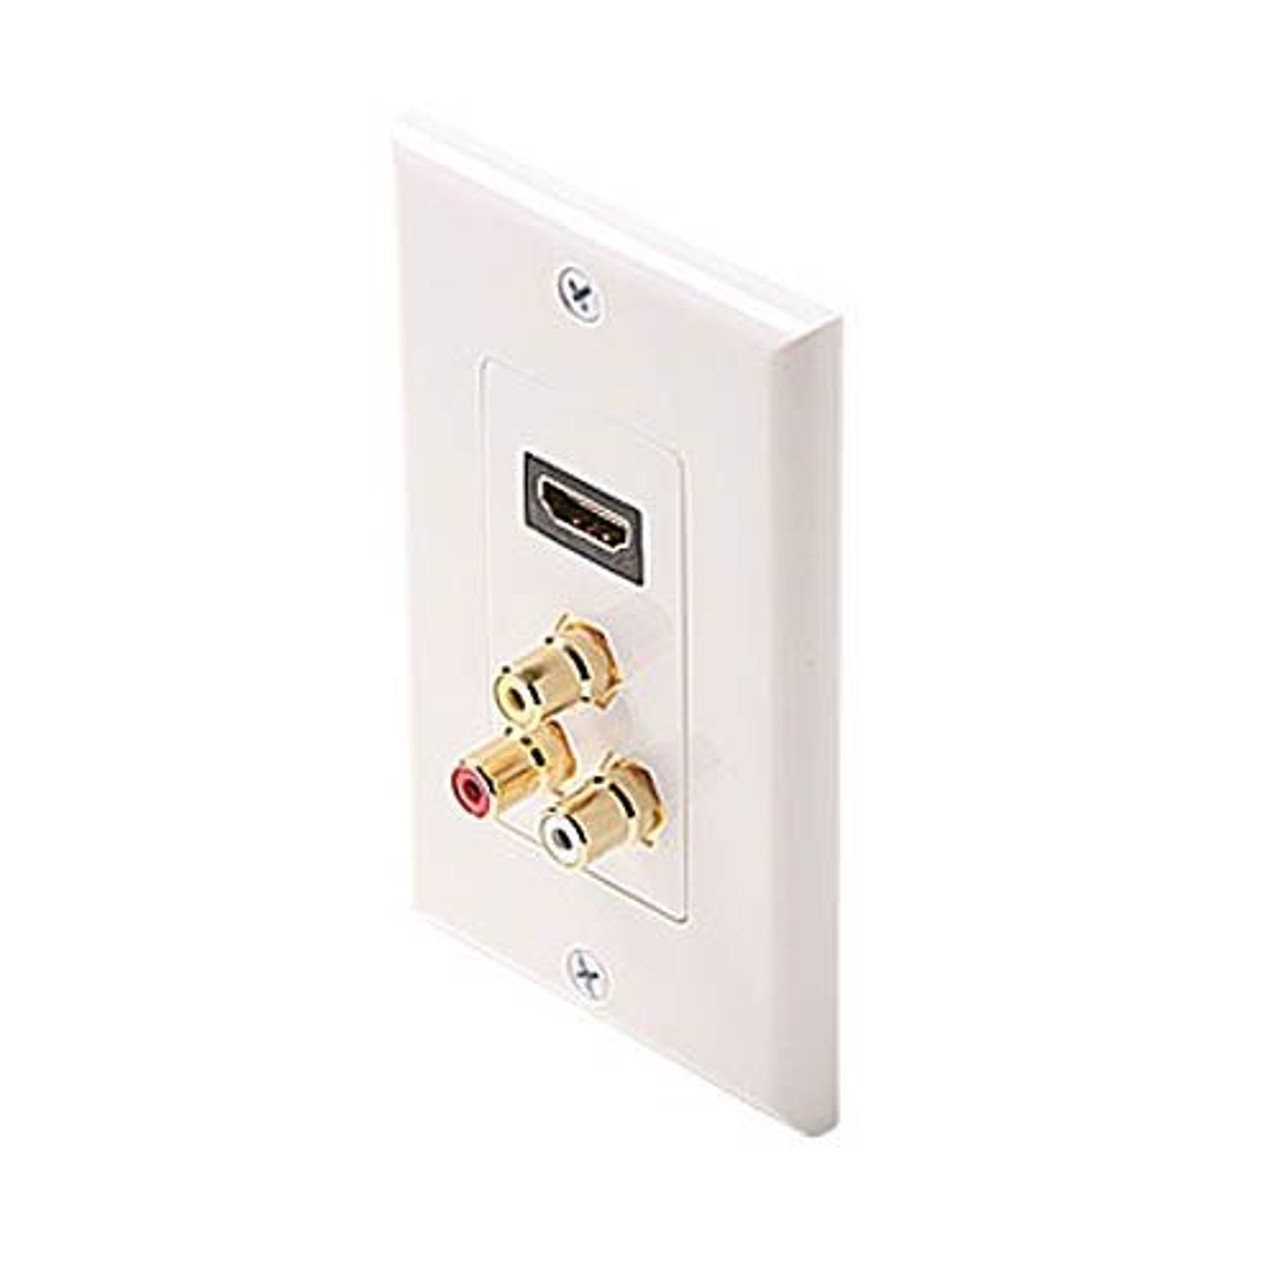 Steren 516-115WH Decorator Style HDMI Feed Thru Wall Plate Composite Combo with 3 RCA Gold Stereo Jacks White Plate HDMI Female to HDMI Female, HD Multi-Media Interface HDTV Applications, Part # 516115-WH